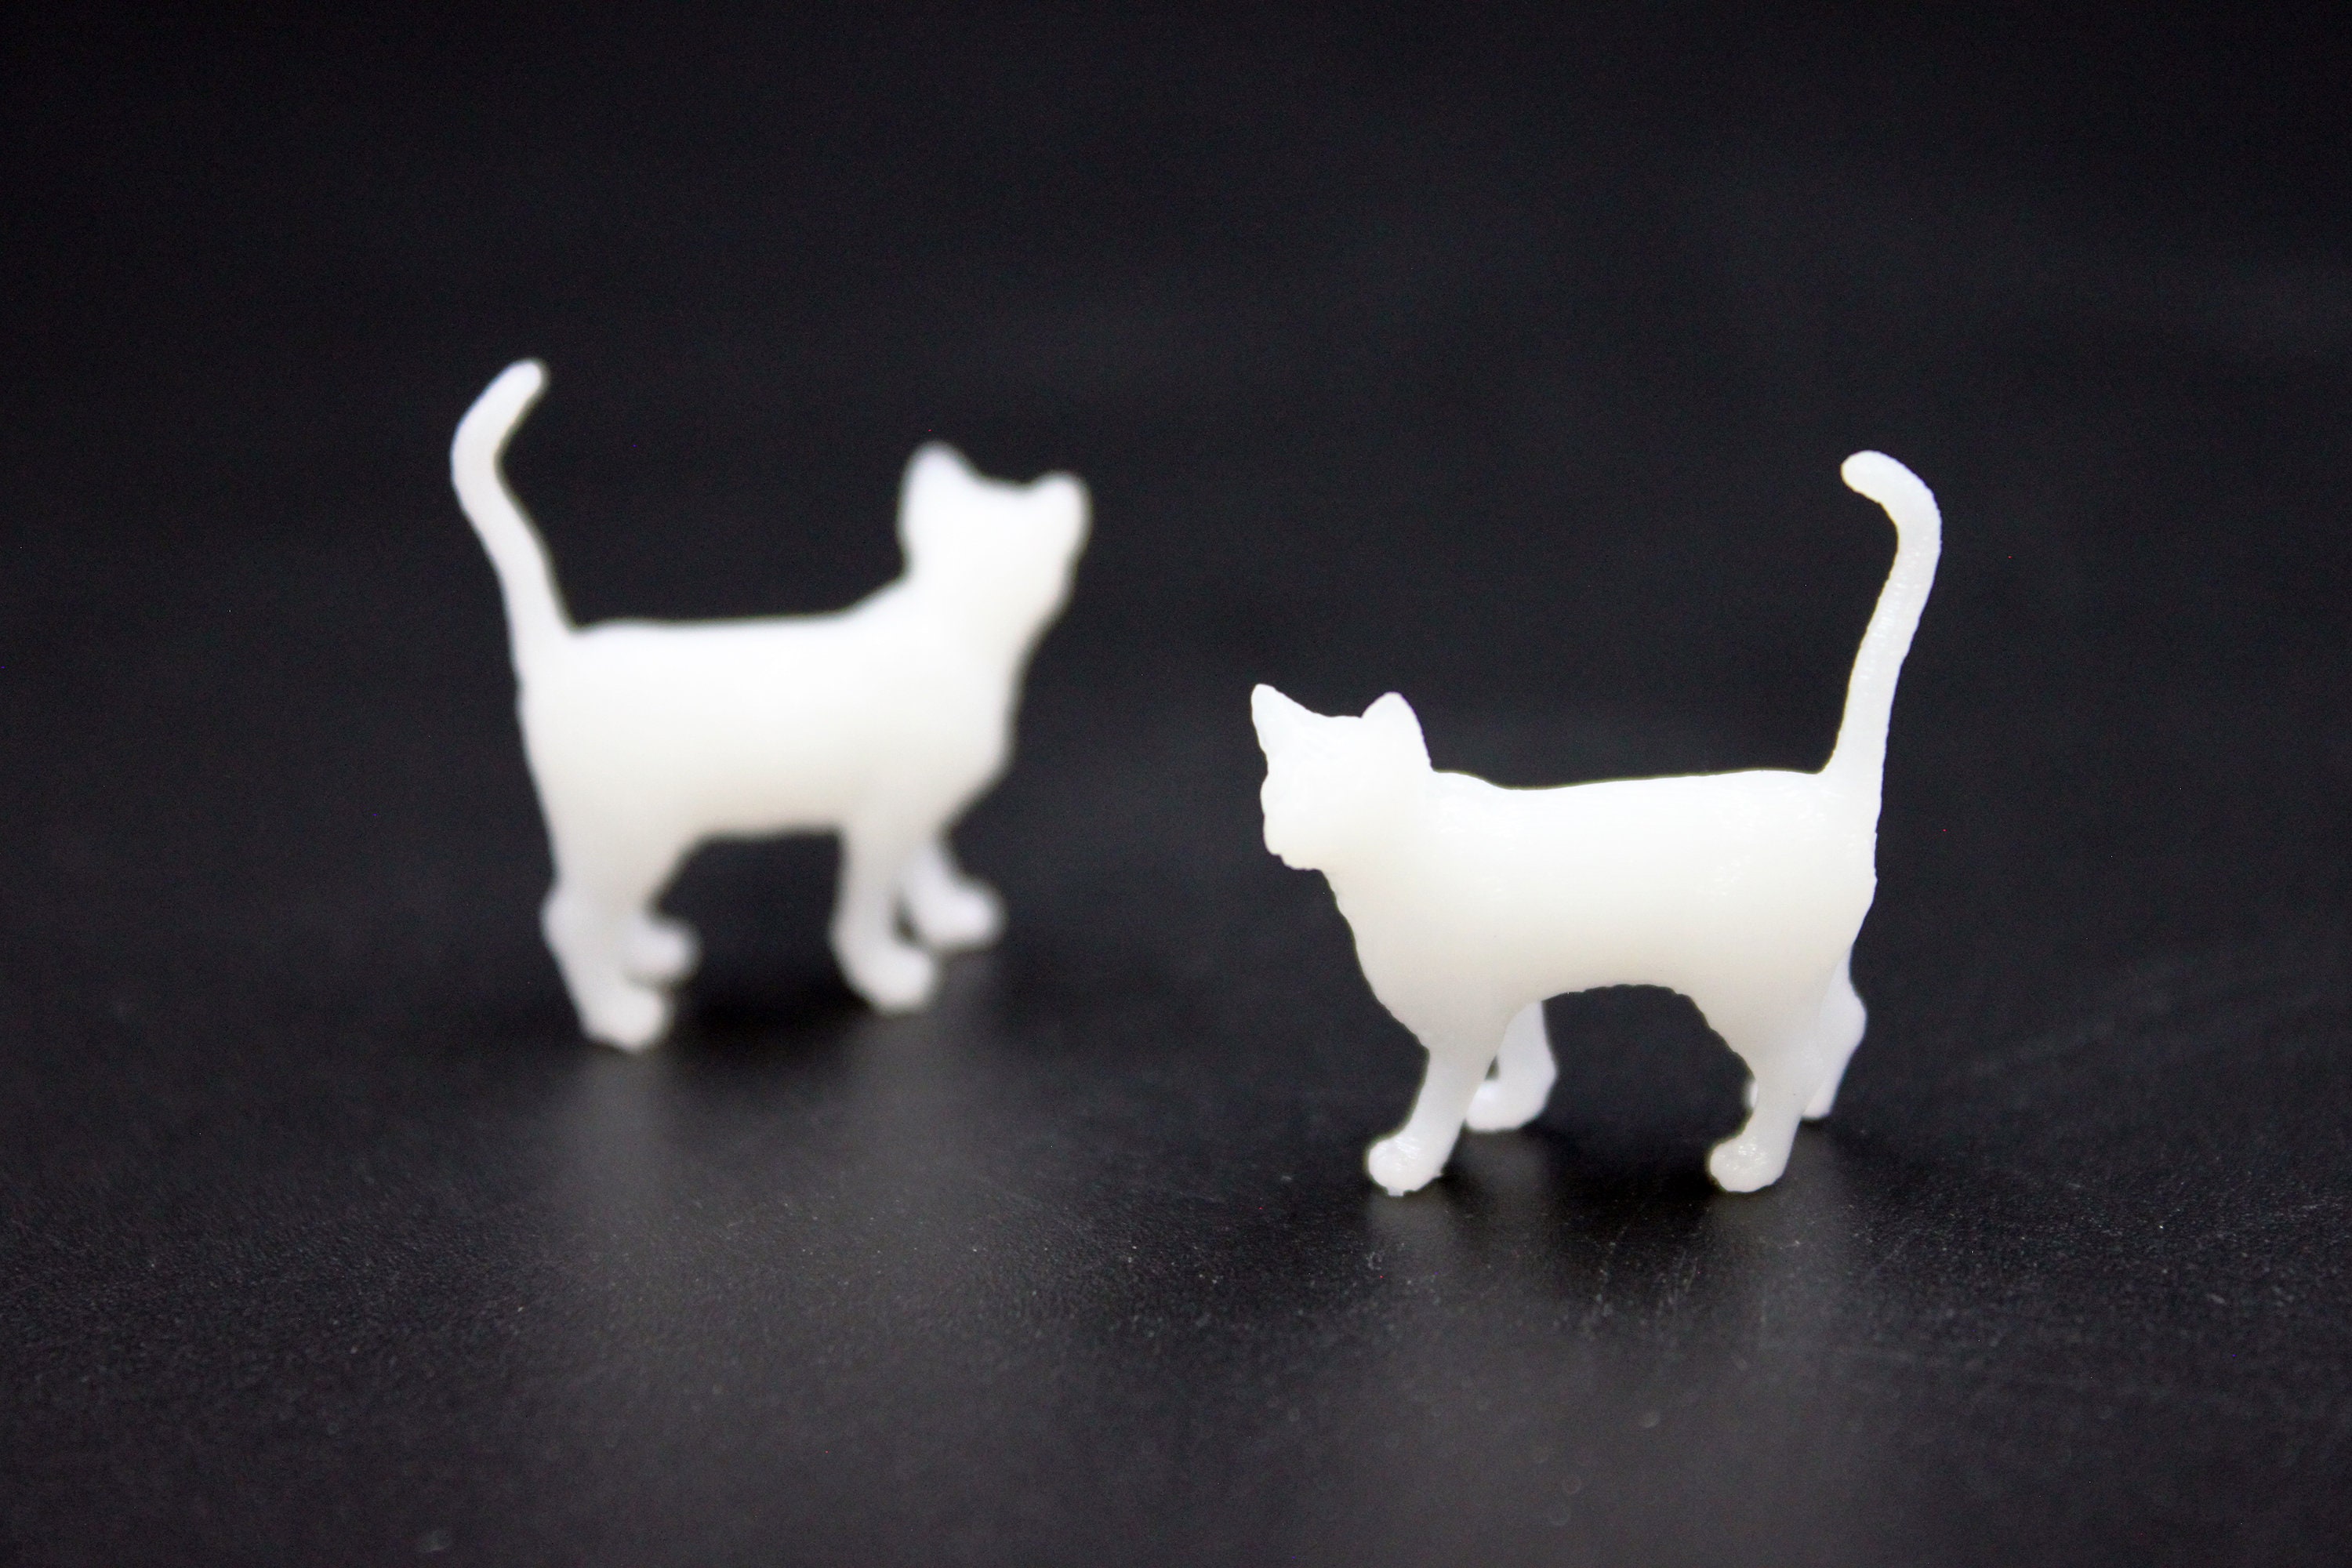 Tiny Sitting Kitten Miniature 1:24 G Scale Hand Painted Resin 